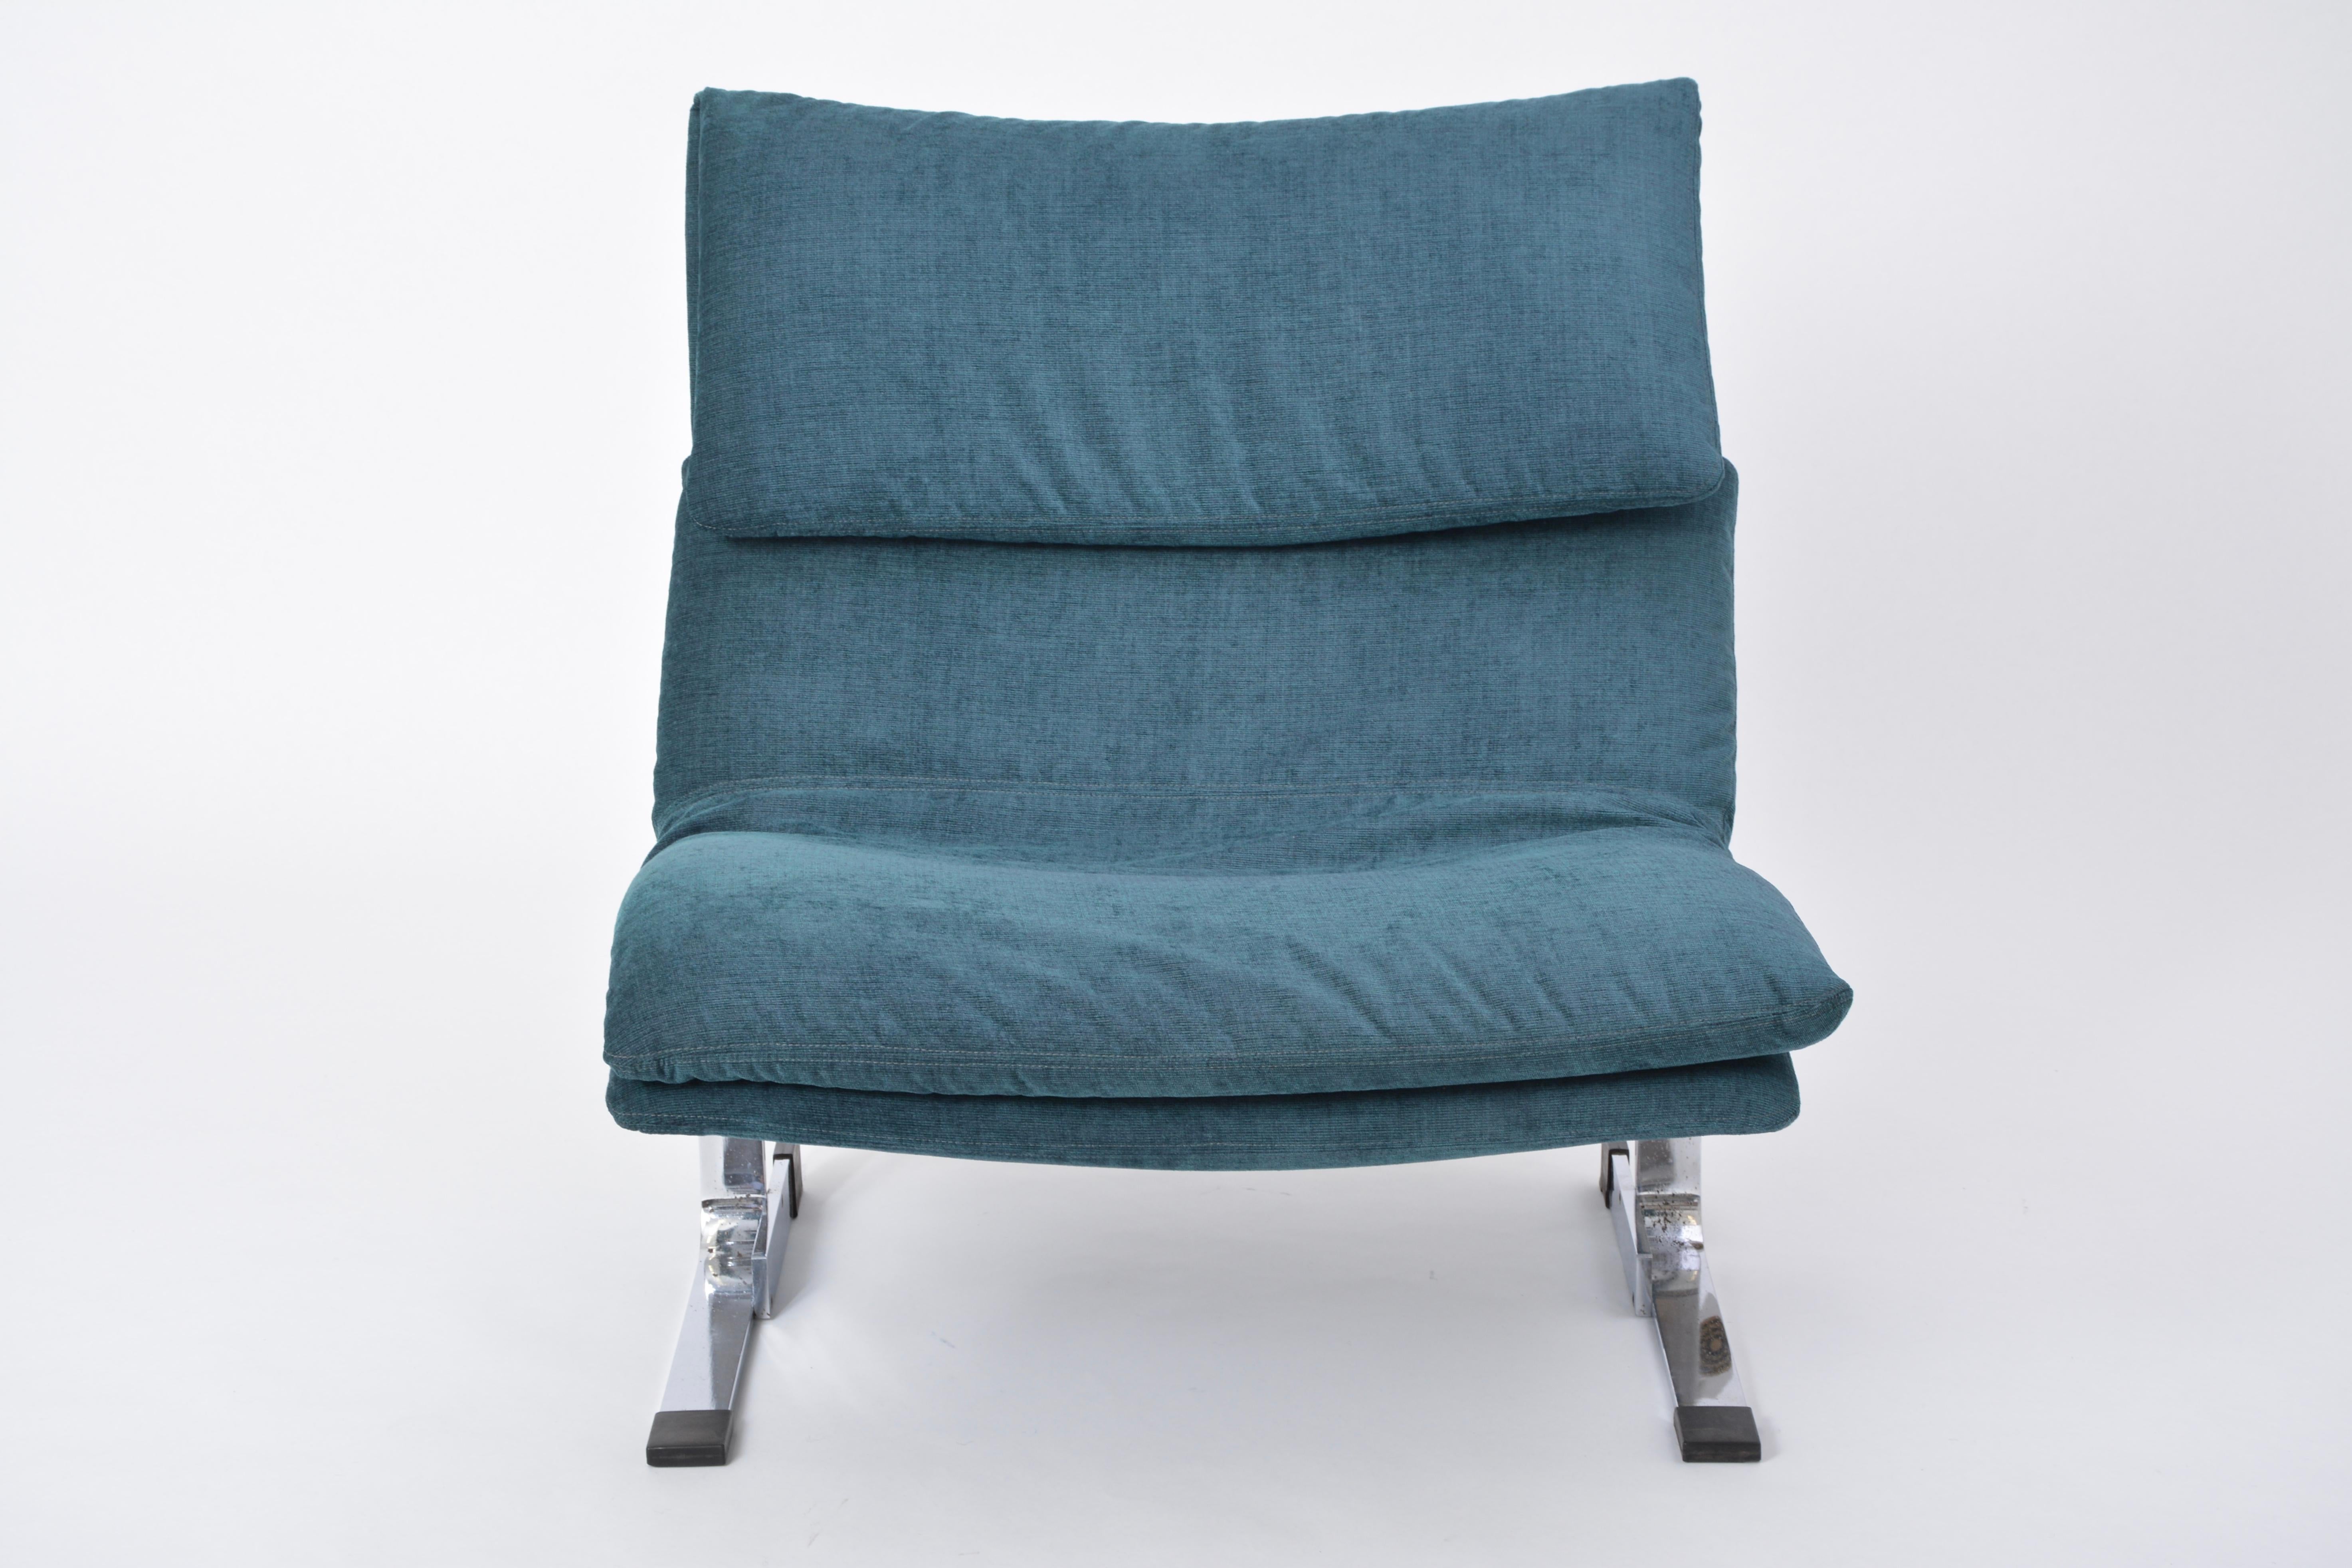 Reupholstered Post Modern Onda lounge chair by Giovanni Offredi for Saporiti 1